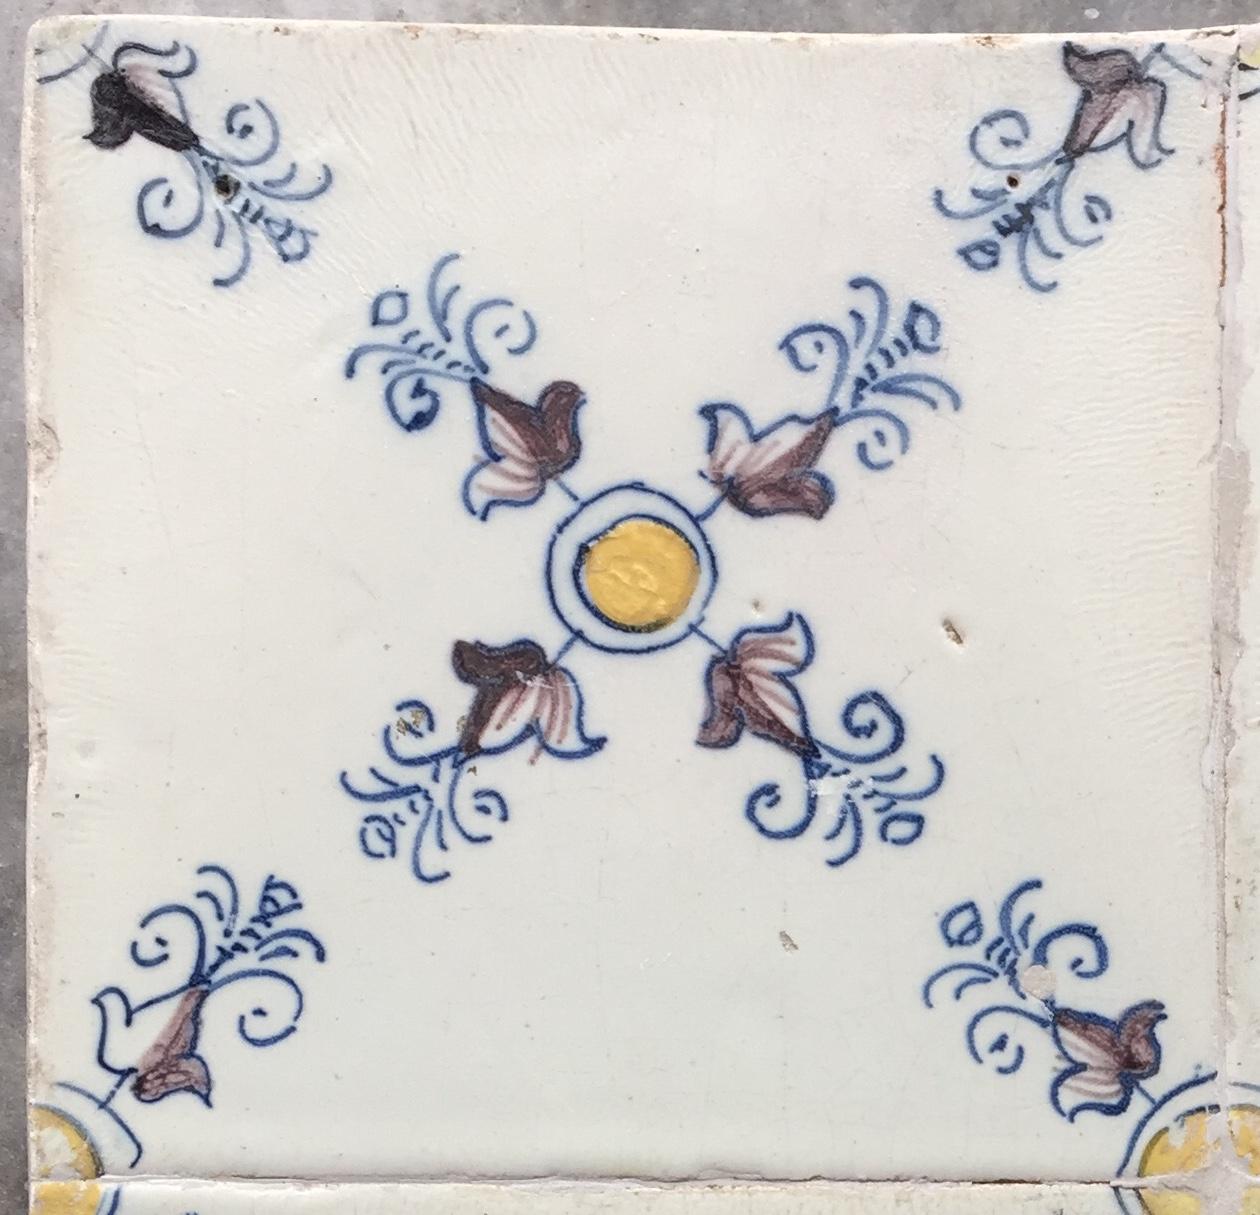 A set of 4 polychrome Dutch Delft tiles with ornamental design. 
Made in Haarlem, The Netherlands.
Circa 1625 - 1650.

The Netherlands
Haarlem
1625 - 1650

A nice panel of four so-called Haarlemmer ornament tiles, in Italian style, with less